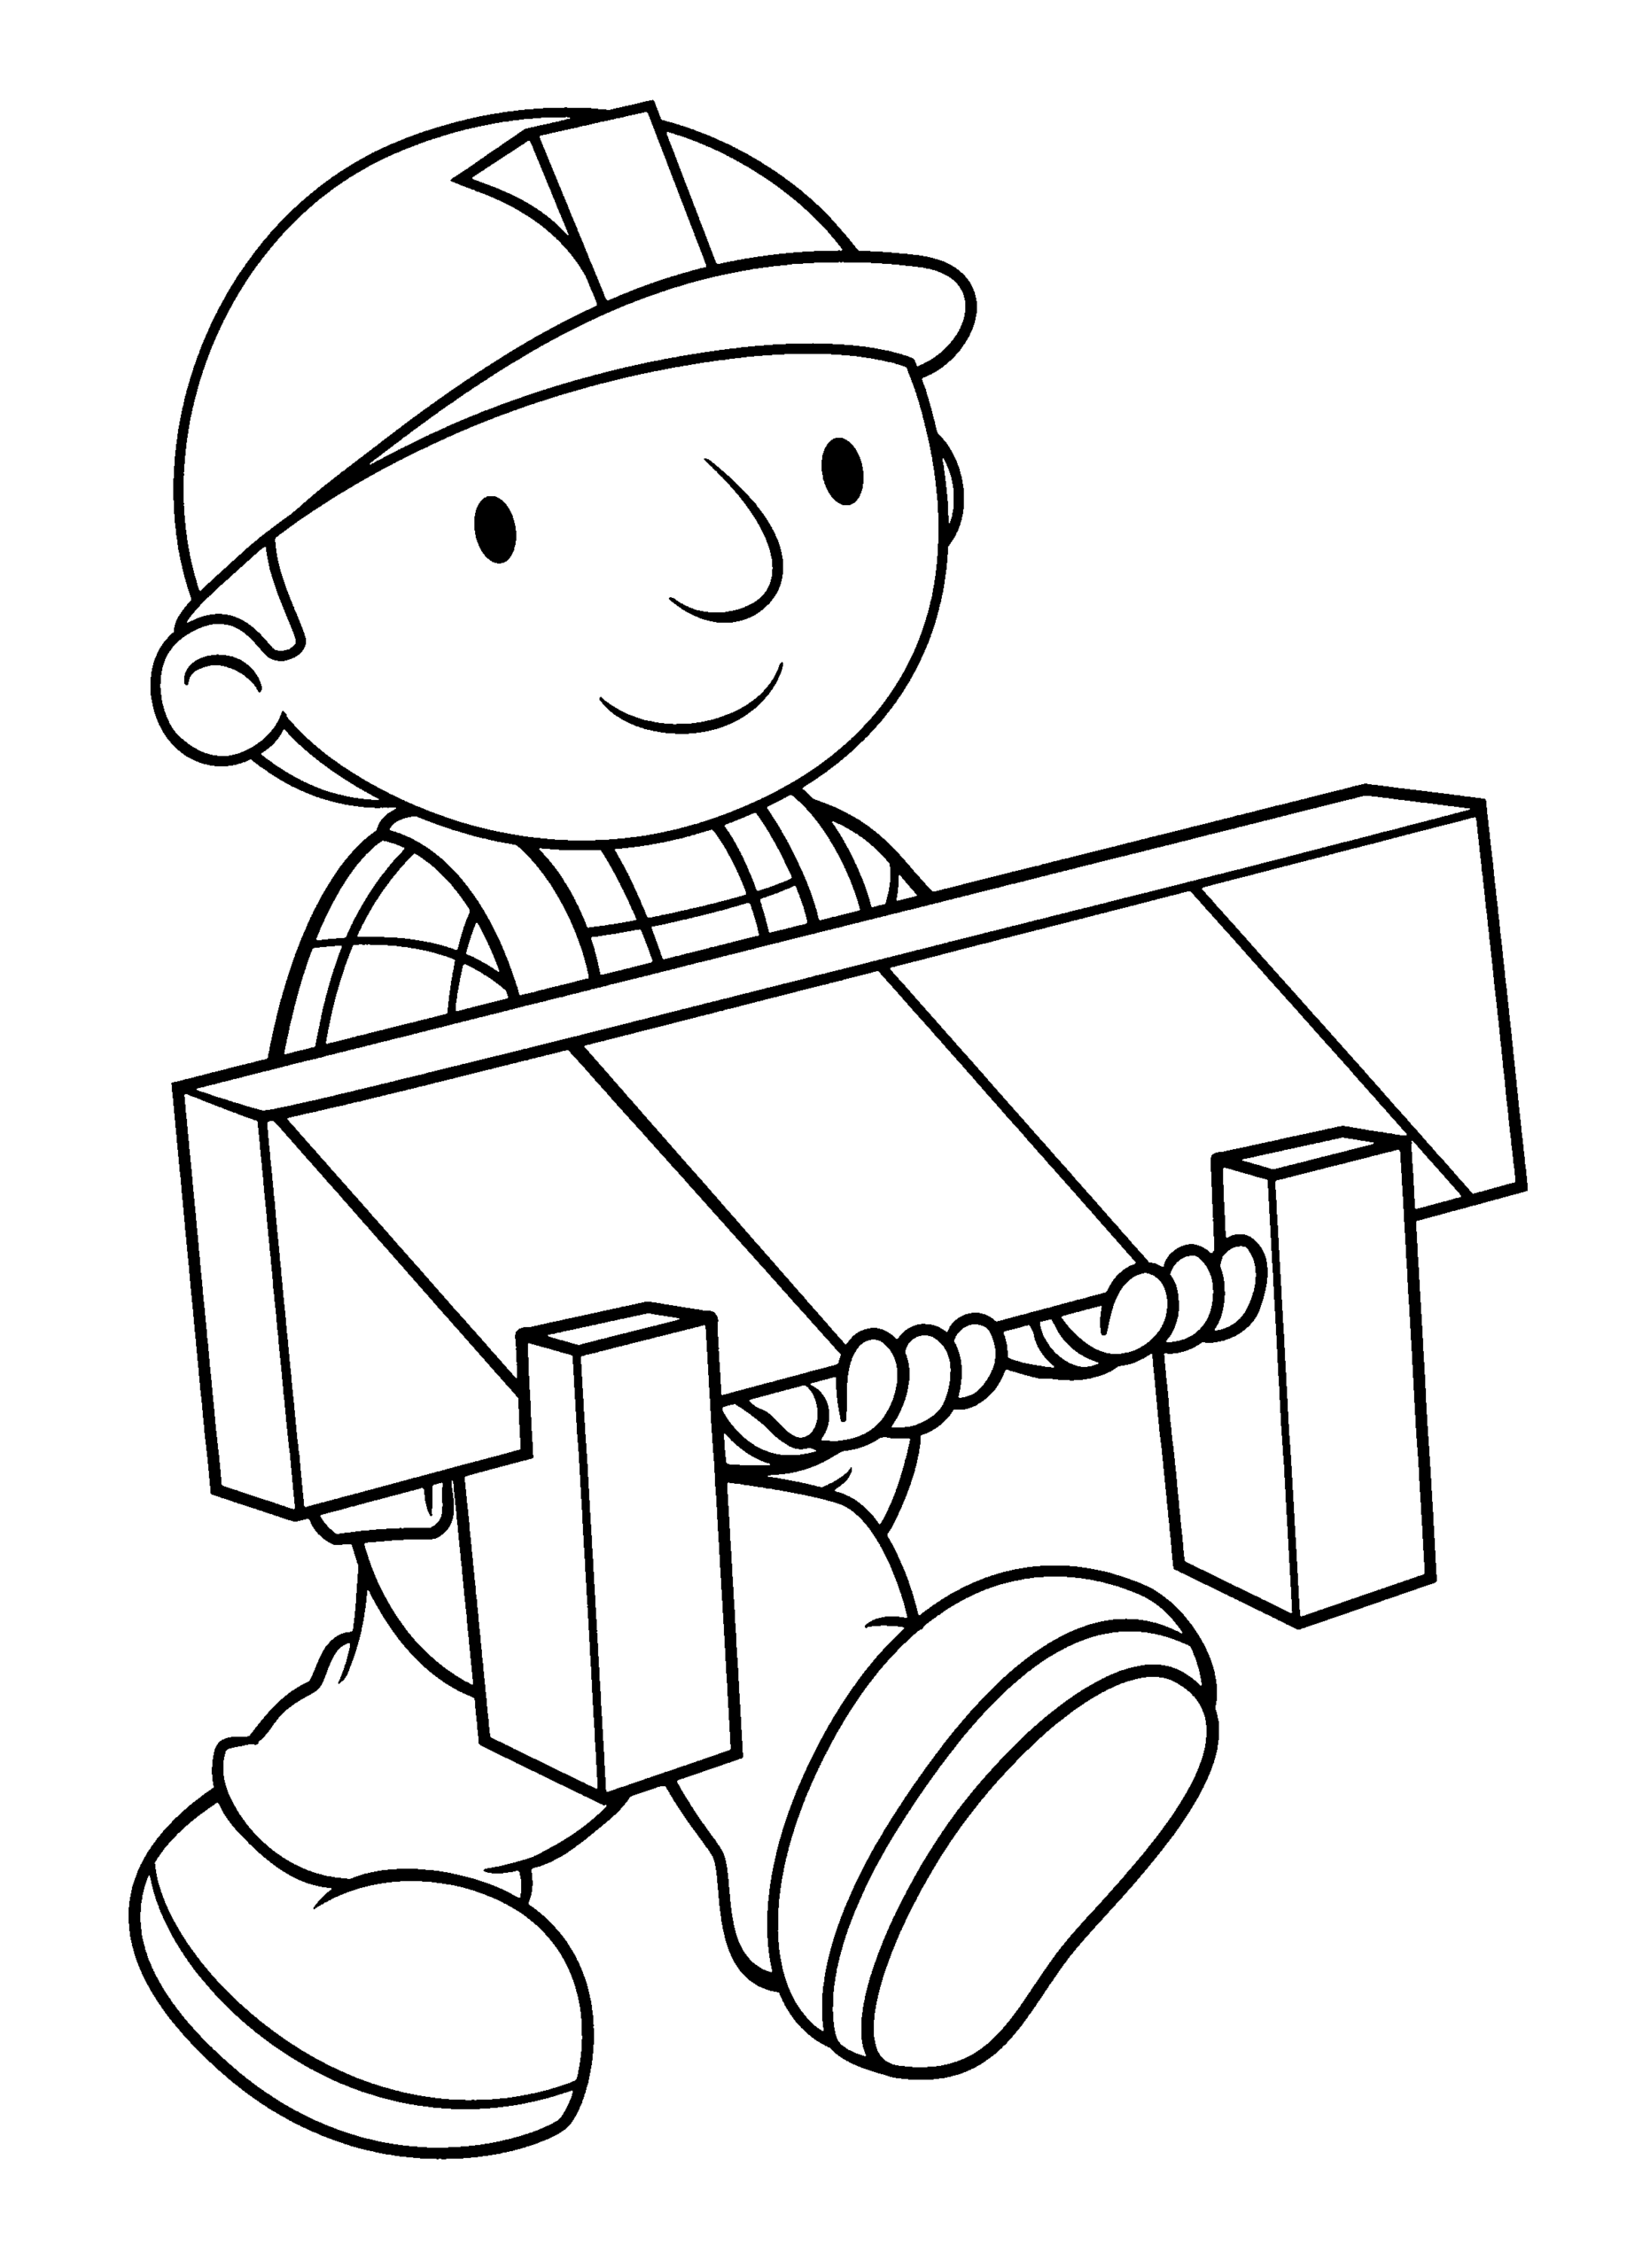 Bob the Builder Coloring Pages TV Film bob the builder 20 Printable 2020 01035 Coloring4free